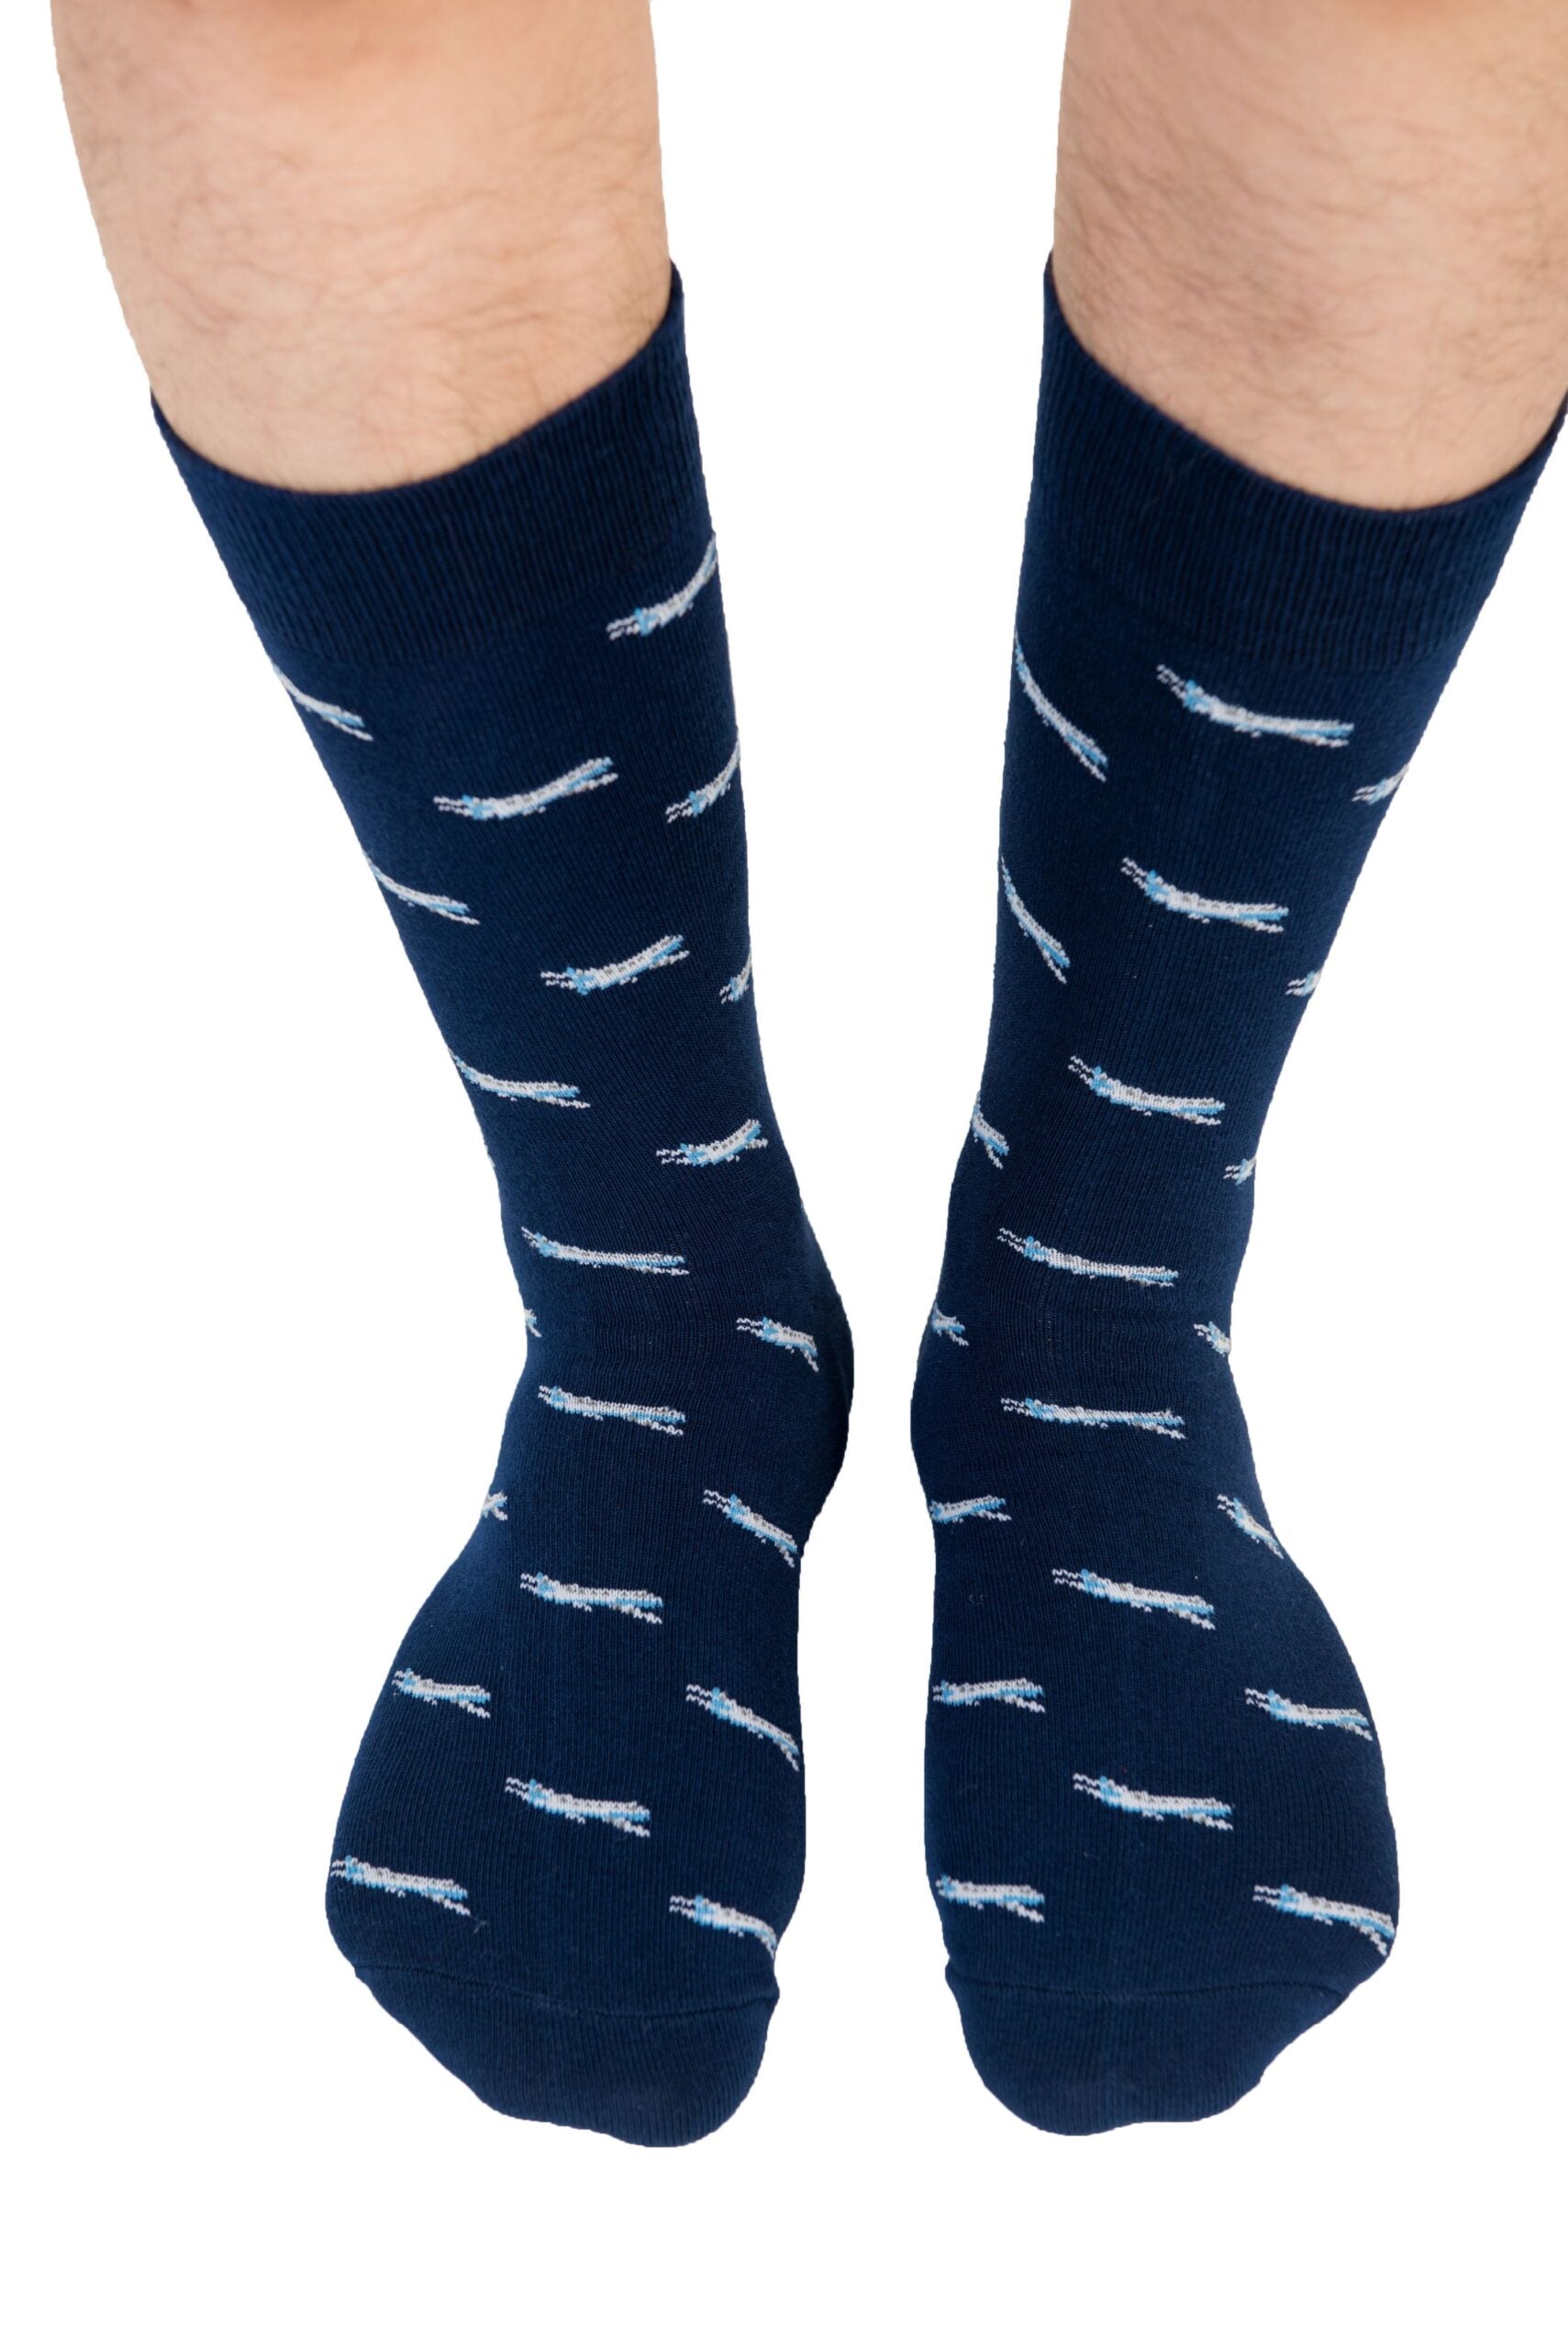 A pair of stylish Aeroplane Socks adorned with a playful fish design.